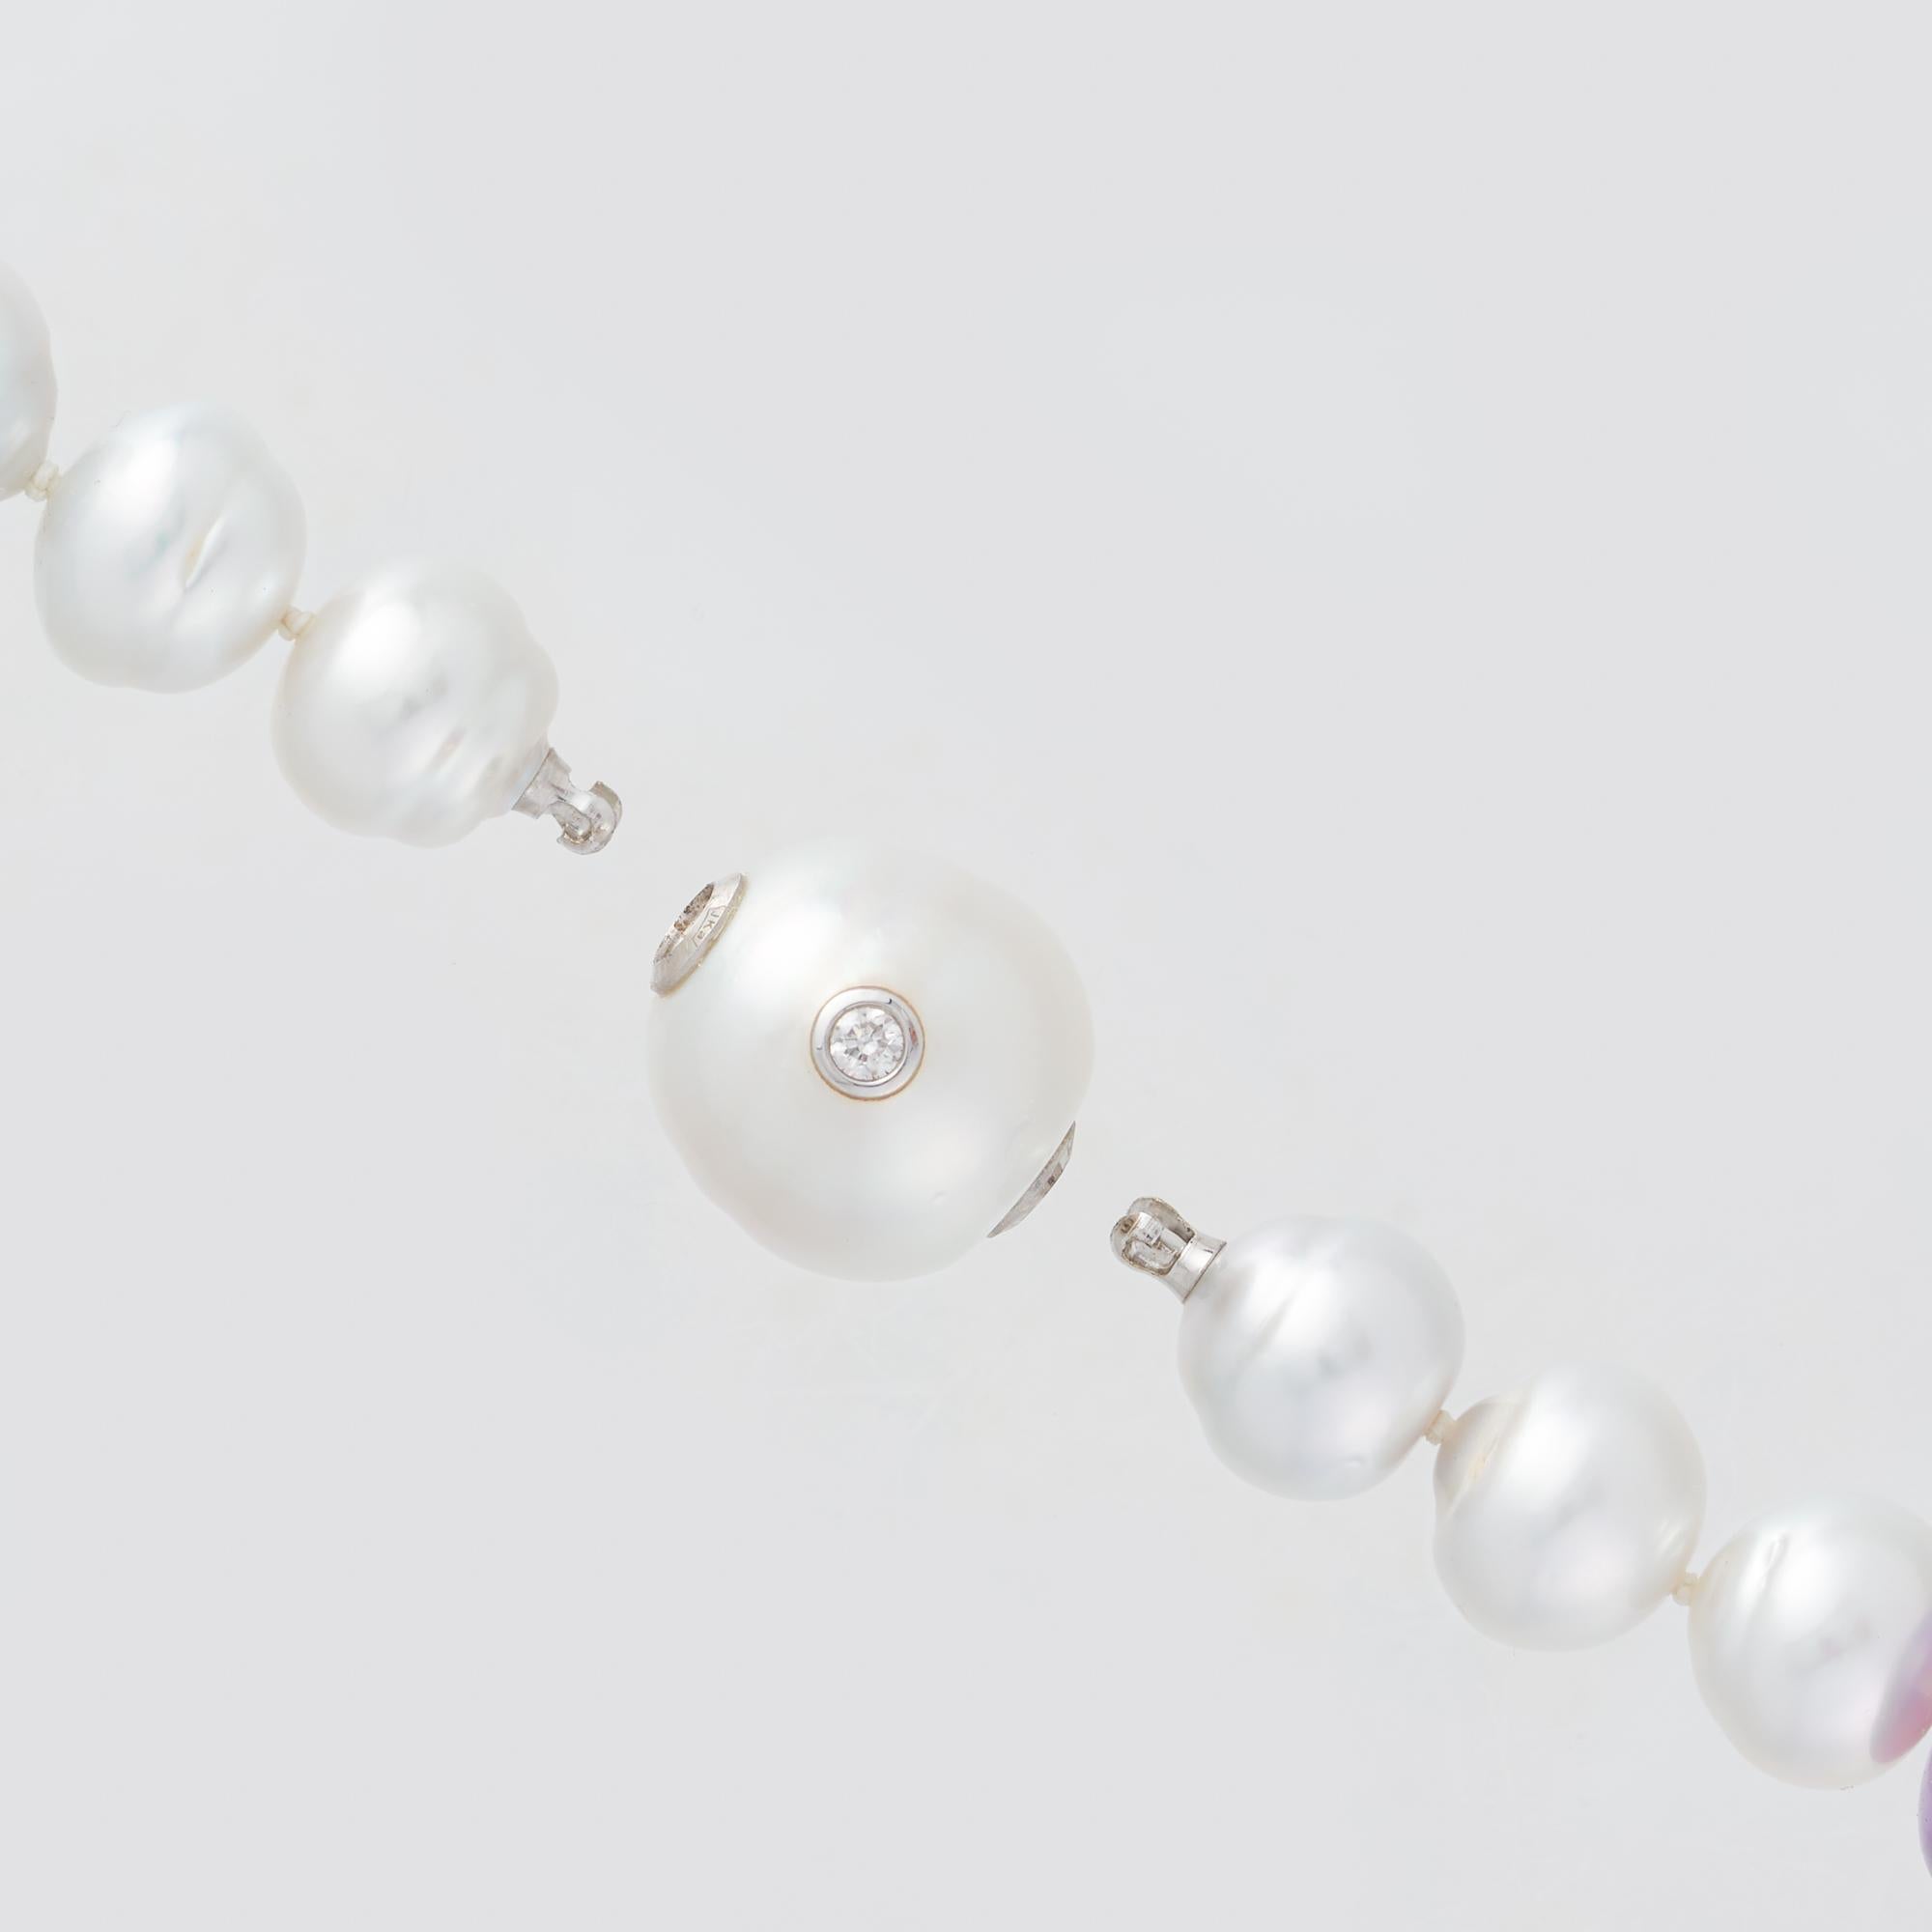 Women's or Men's Margot McKinney South Sea Pearl, Star and Amethyst Pebble Necklet, Diamond Clasp